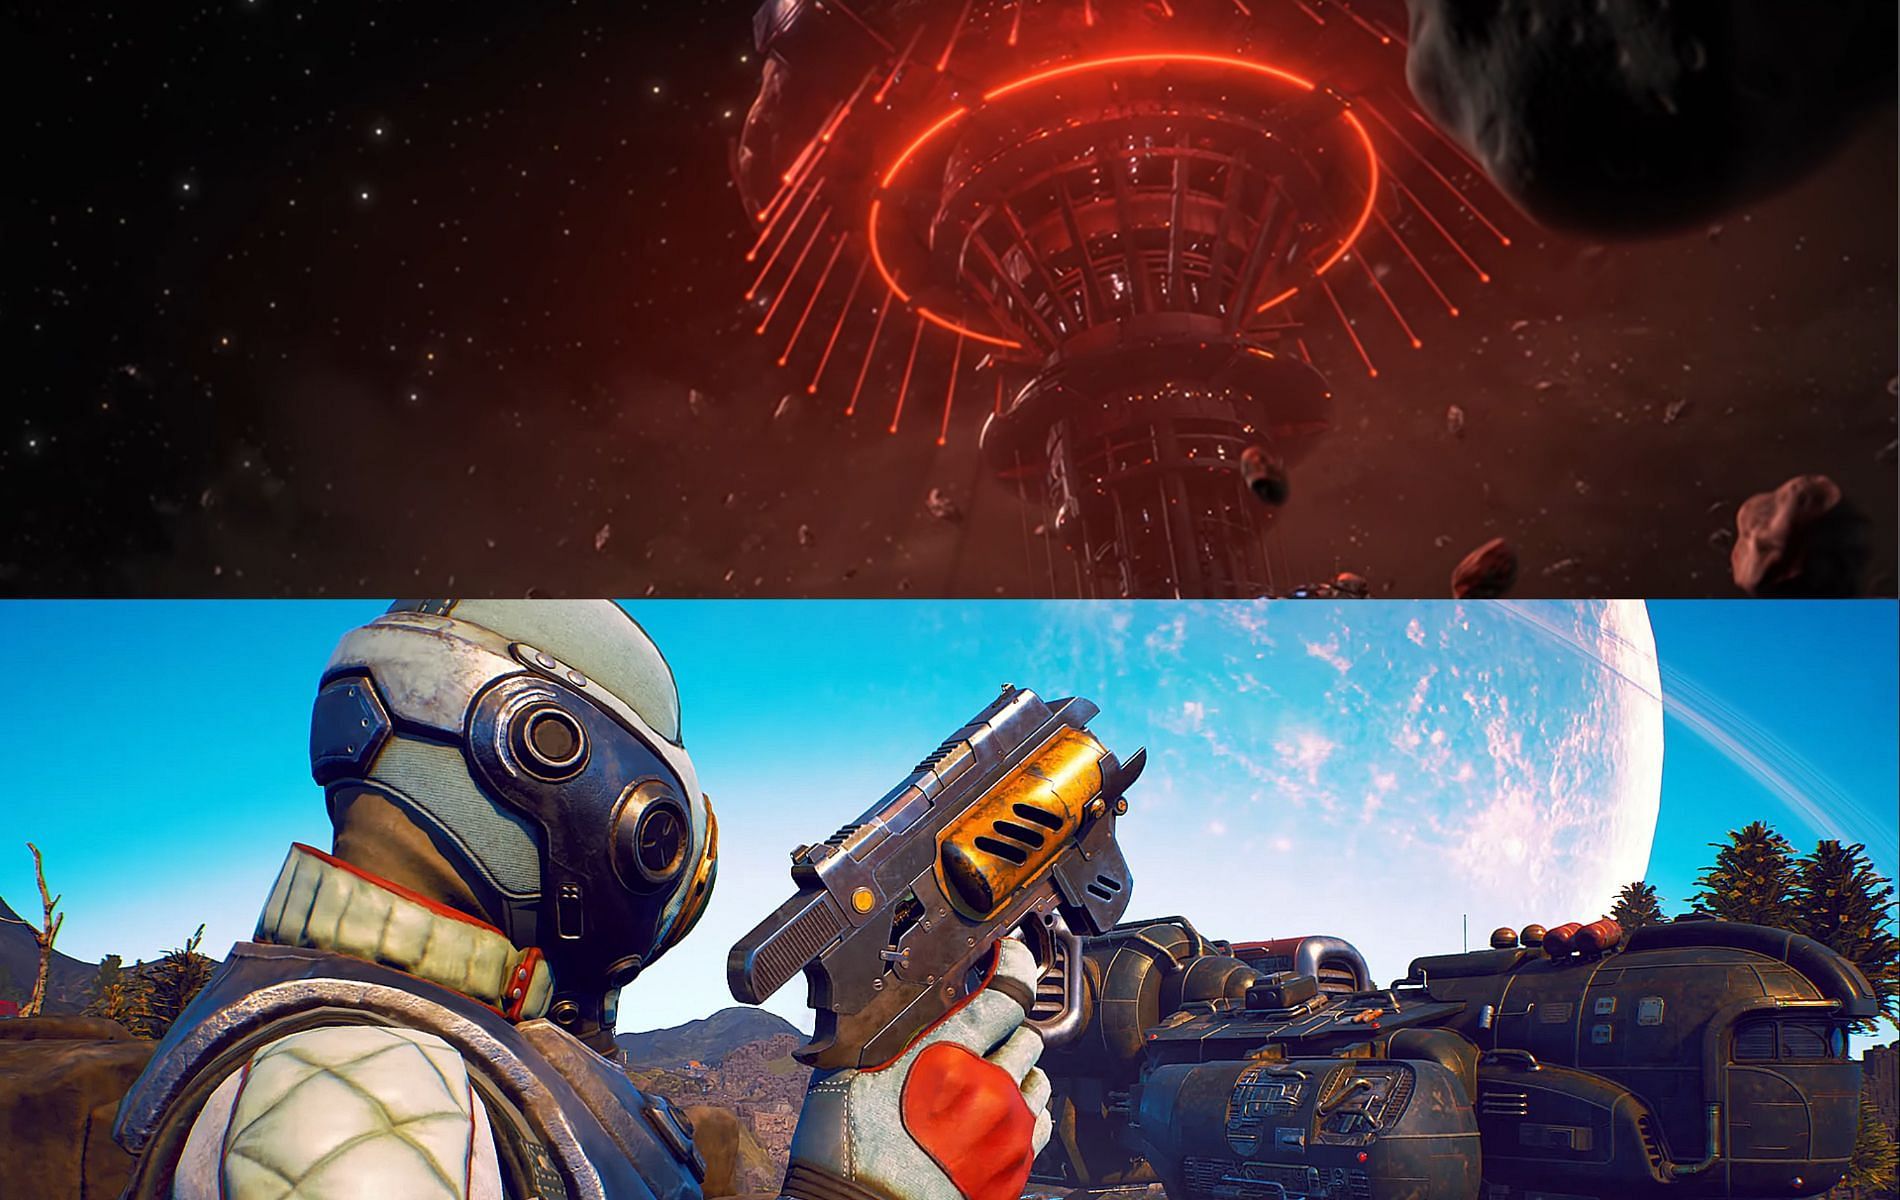 Embark on unforgettable space-themed RPG adventures while you wait for the highly-anticipated release of Starfield (Images via Mass Effect official You Tube and Obsidian Entertainment)